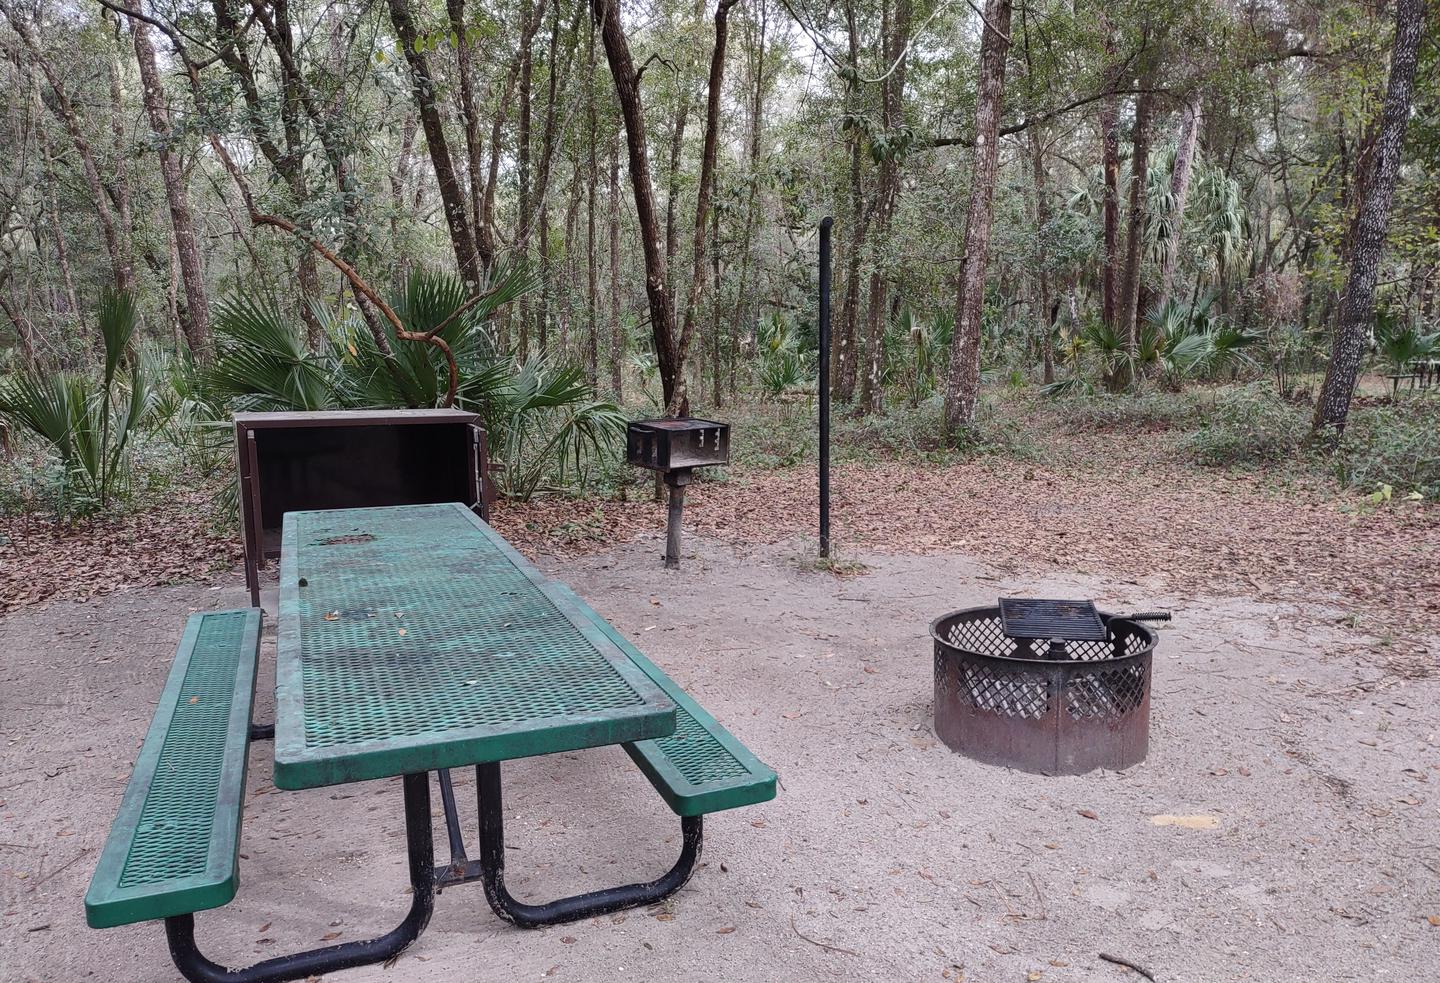 Another view of site 45Amenities: fire ring, picnic table, grill, light pole, bear-proof storage locker